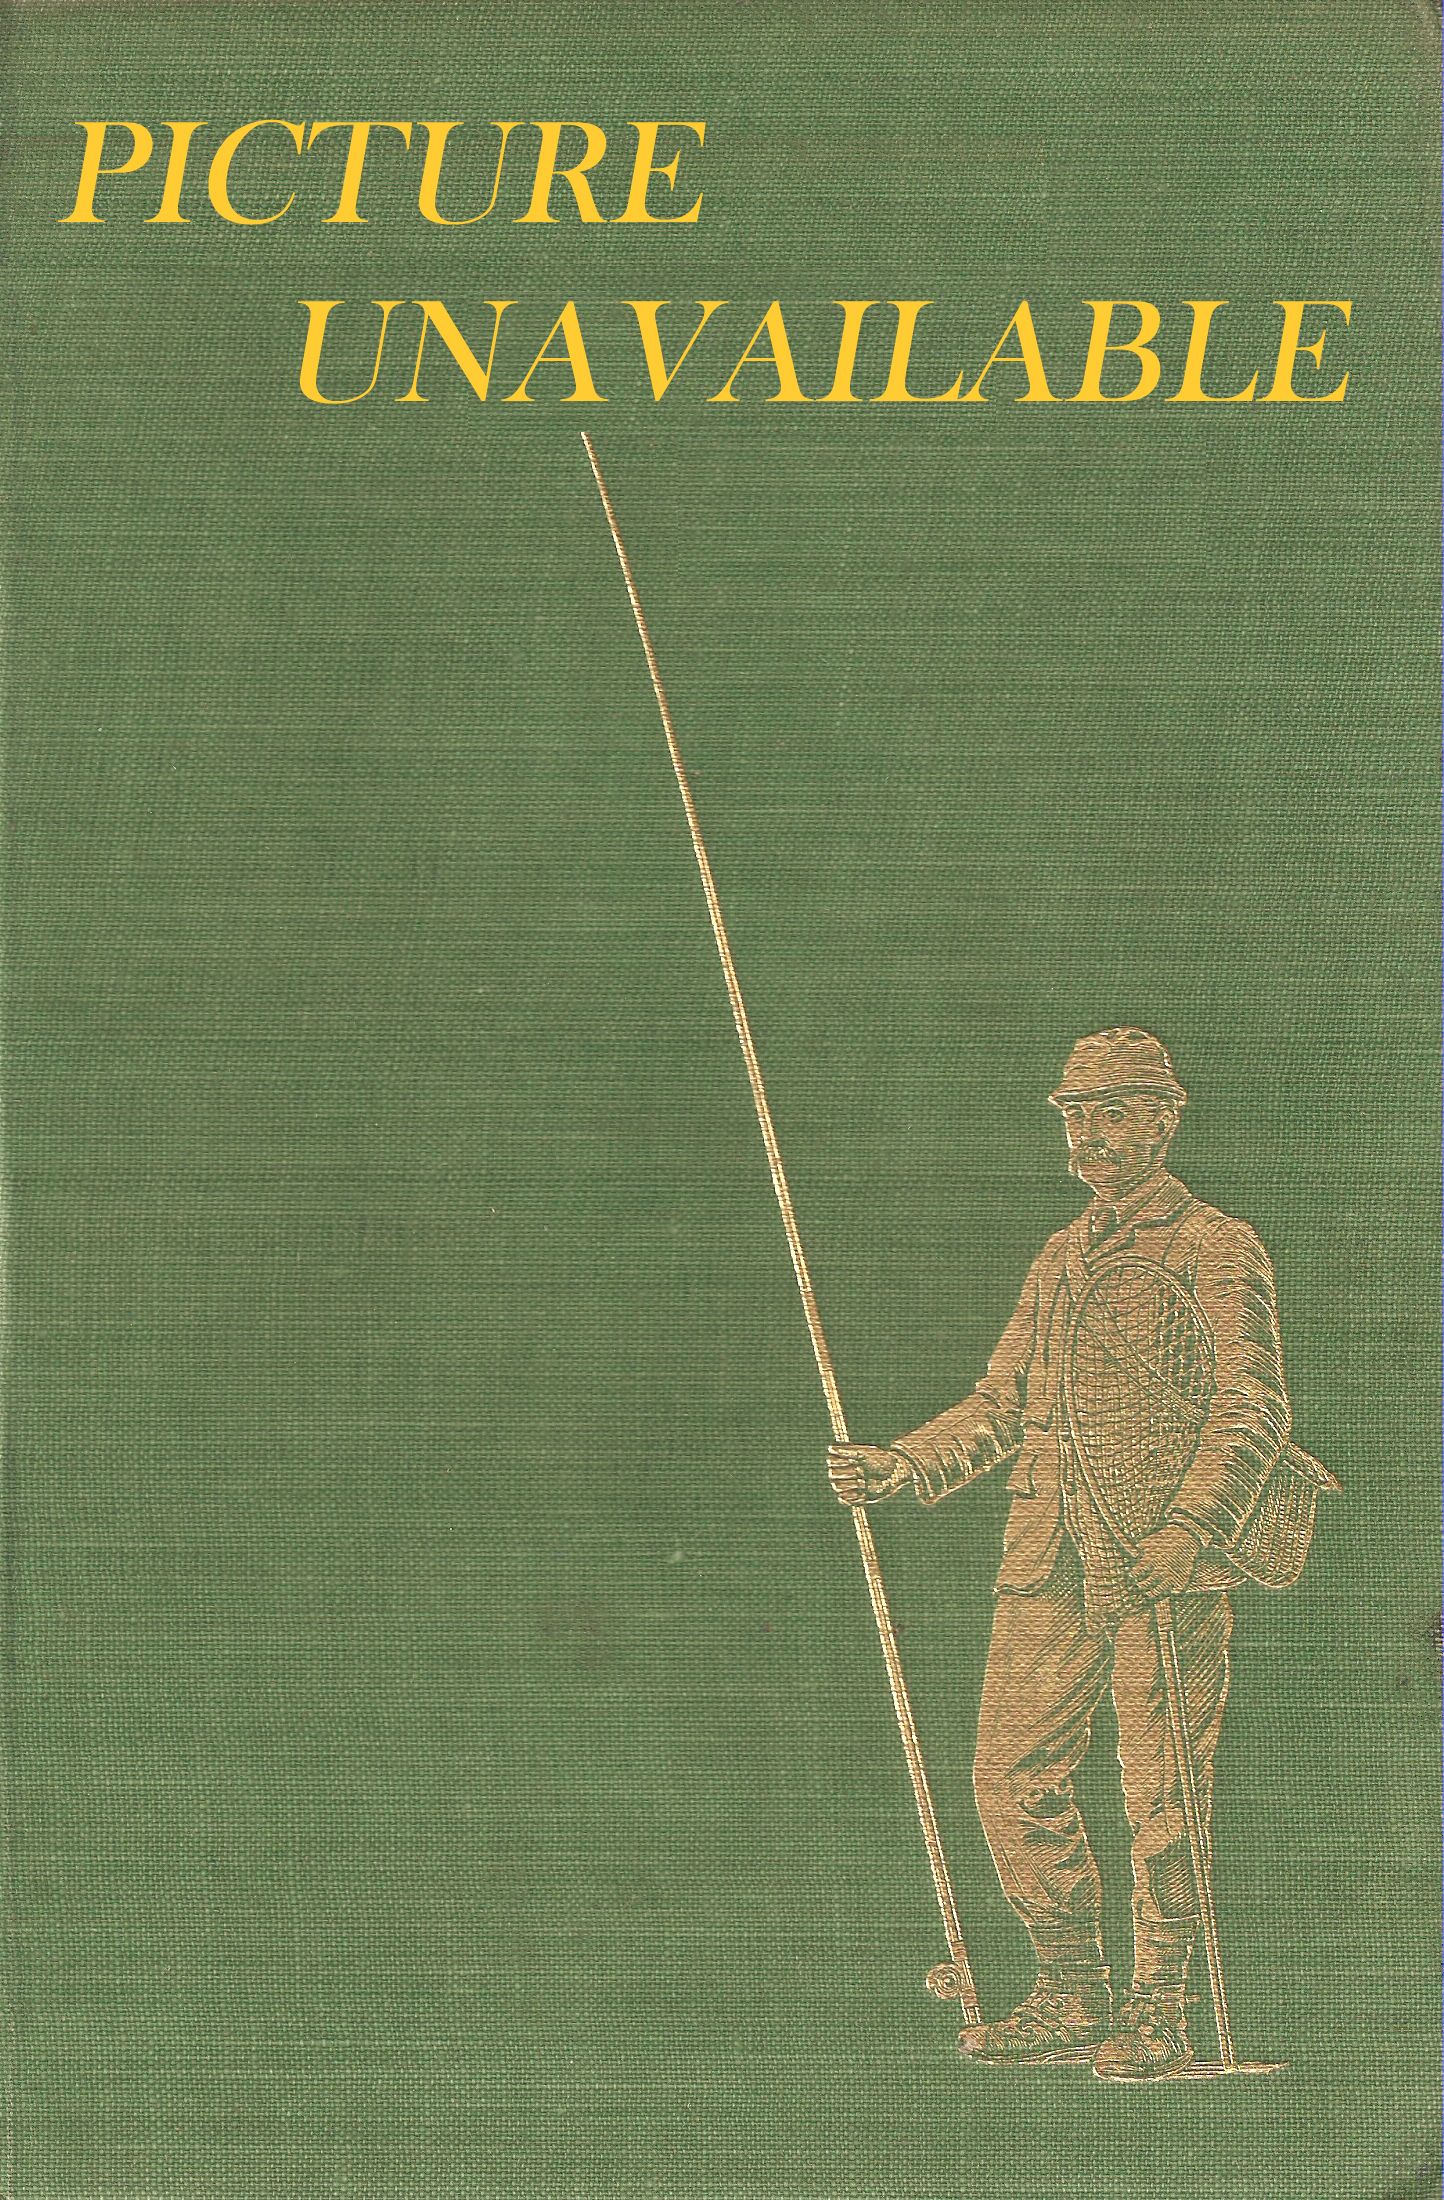 ANGLING: THE SOLITARY VICE. By Fred Buller. De luxe leather-bound edition.